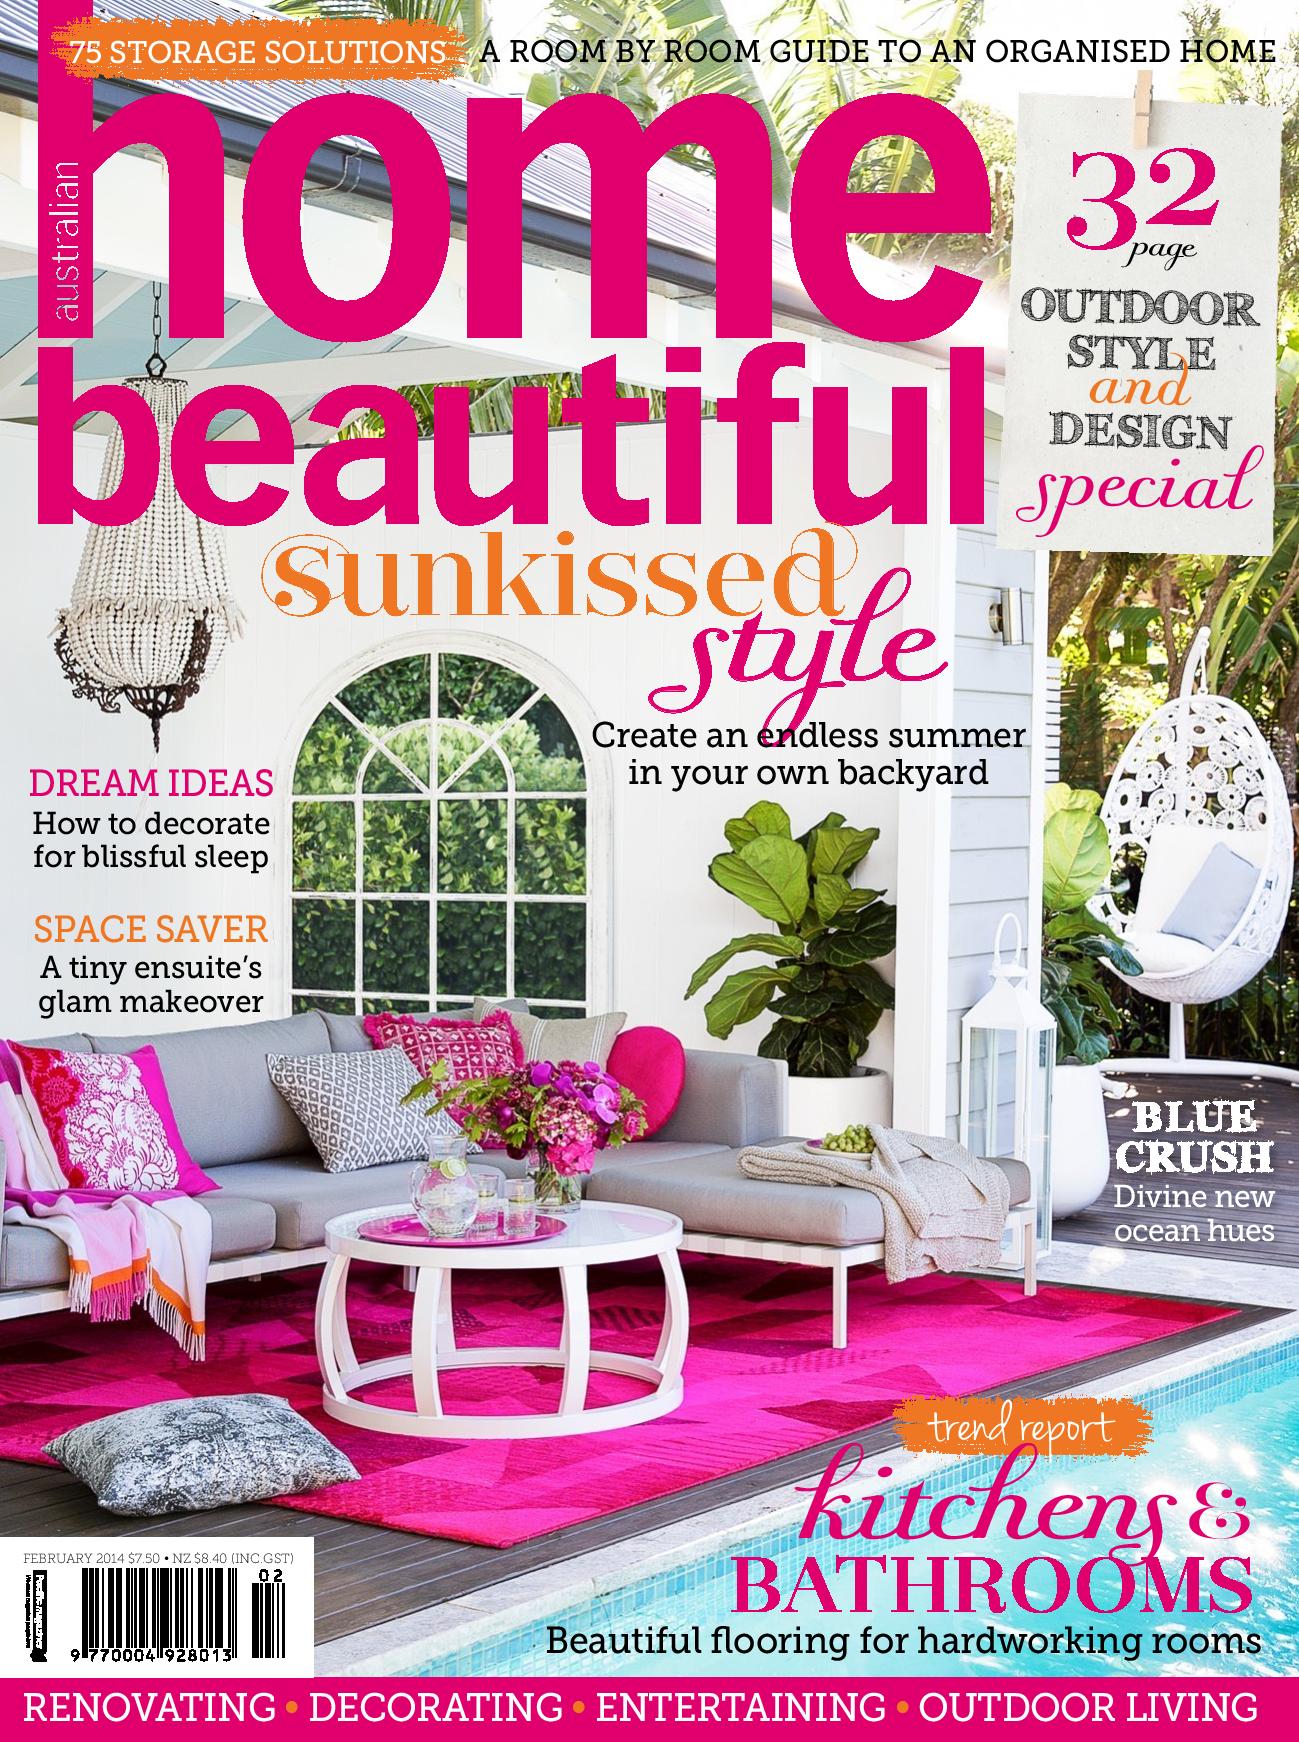 Home Beautiful - Front Cover February 2014 - Melbourne, Sydney